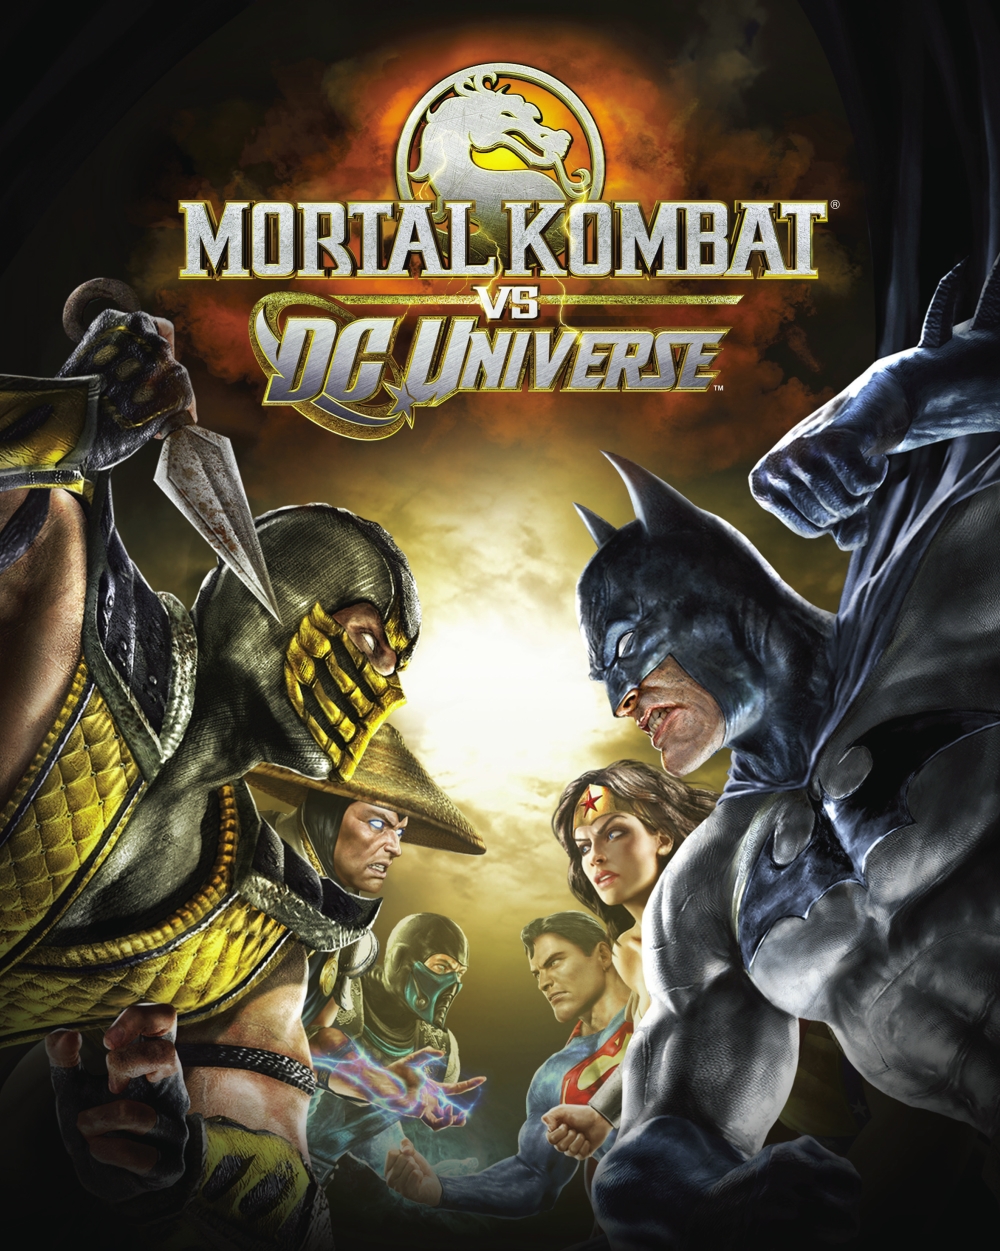 when did mortal kombat 9 come out